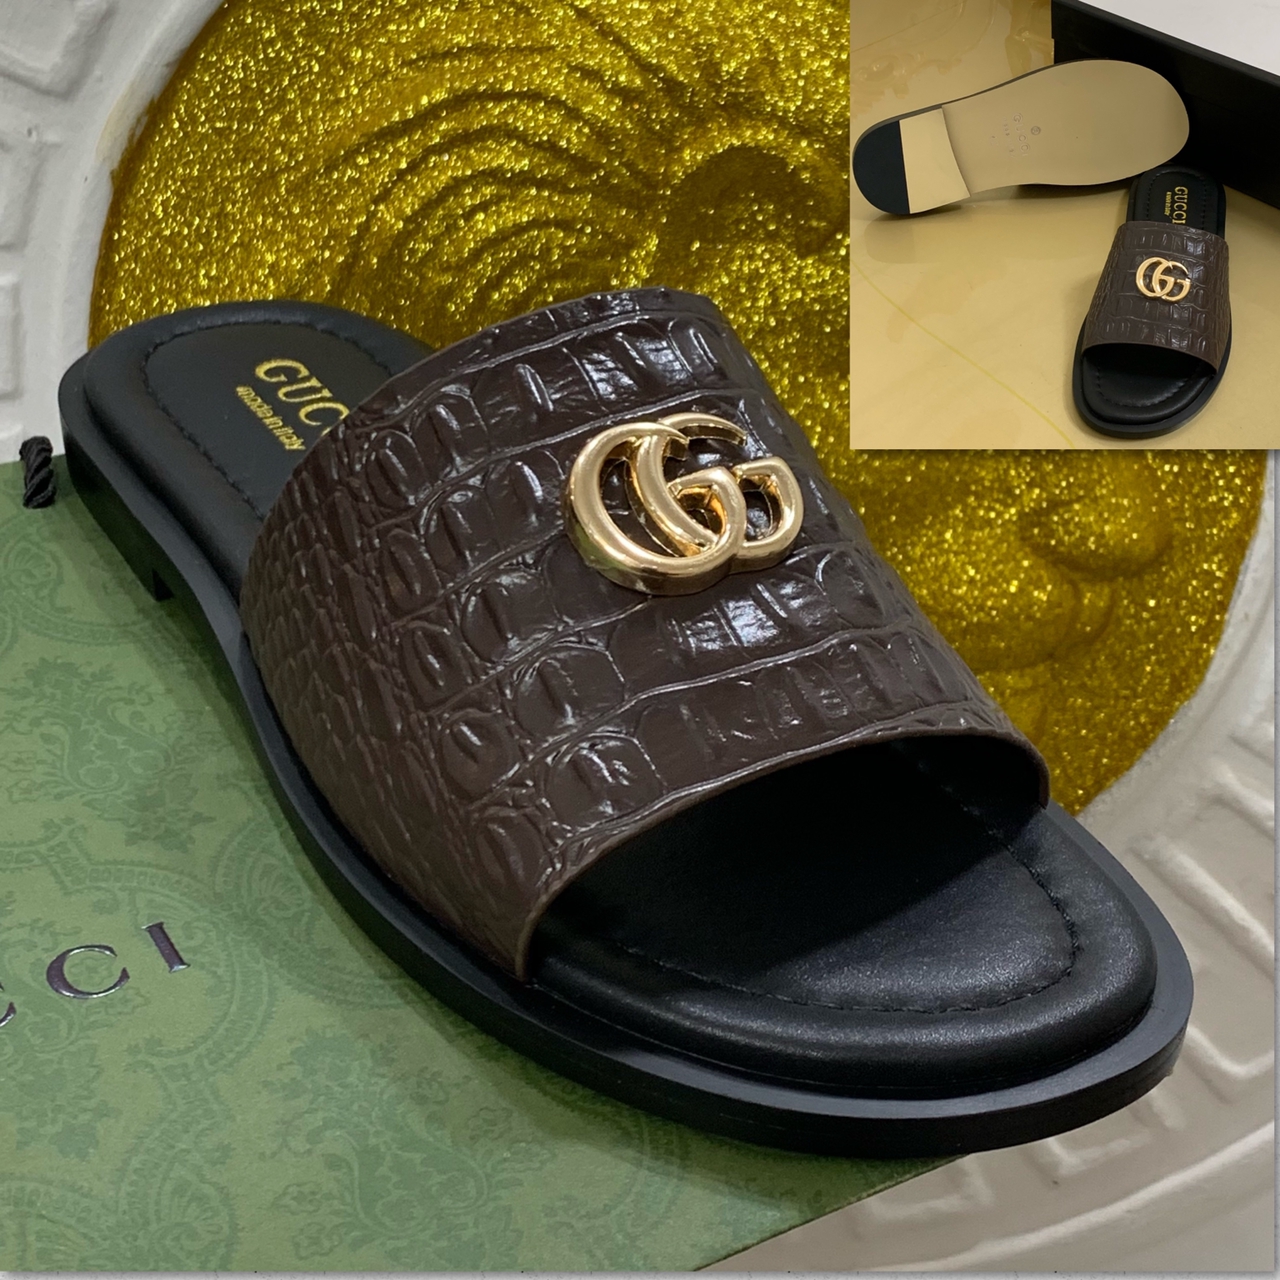 Men Sneakers And Gucci Palm Slippers For Sale - Fashion - Nigeria